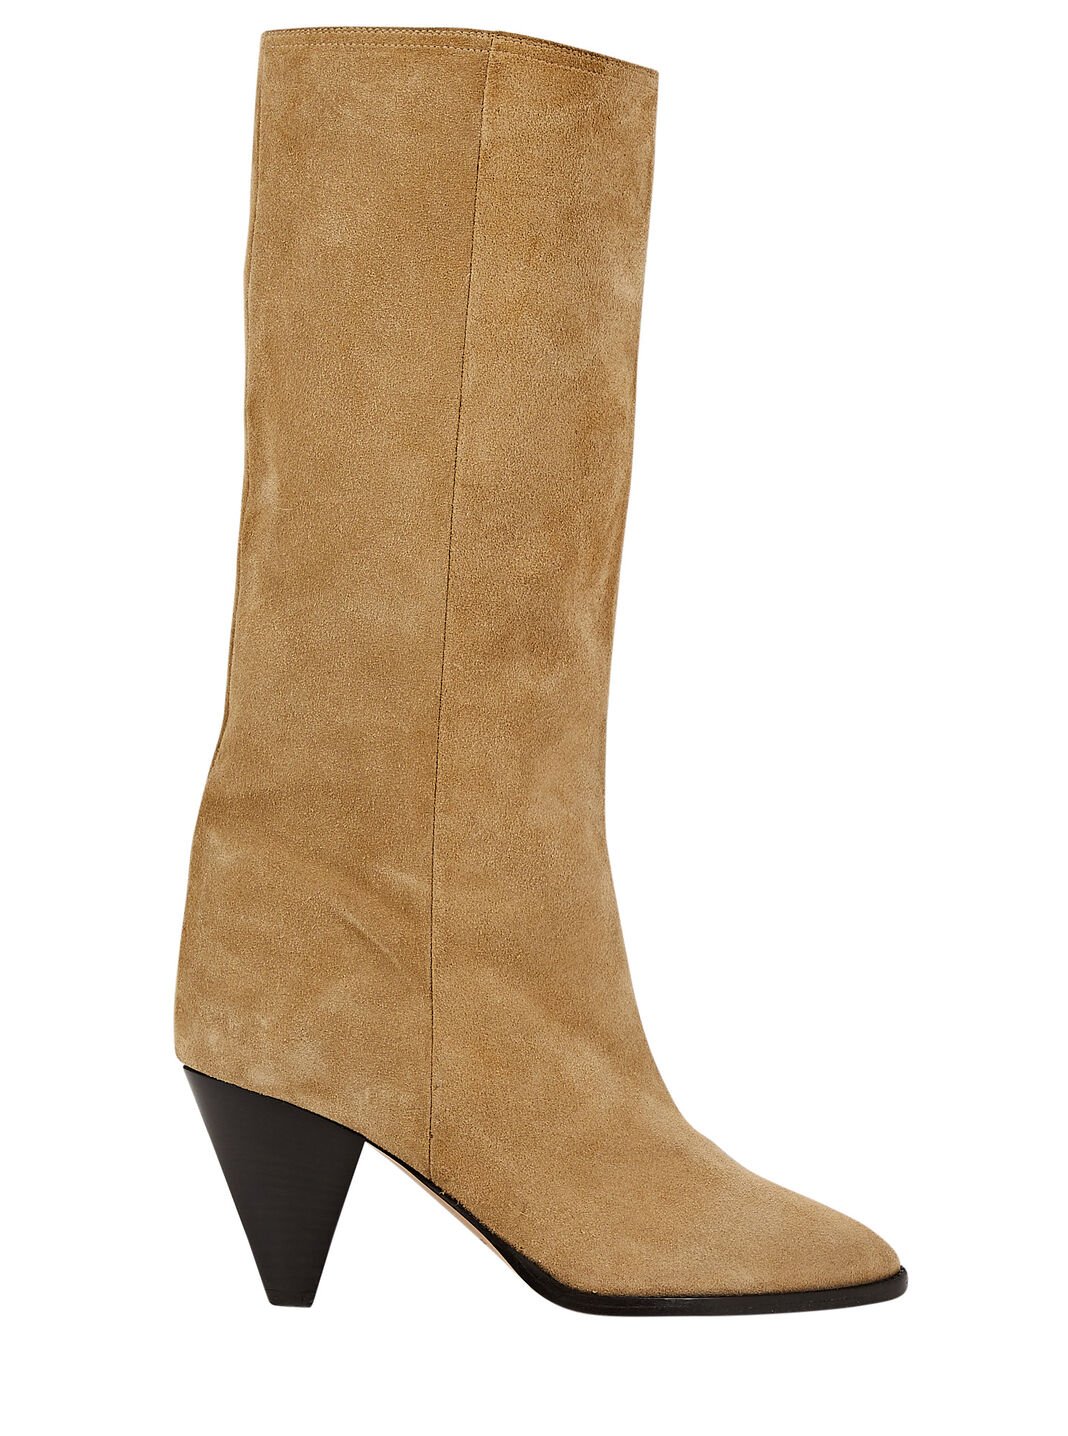 Rouxy Suede Mid-Calf Boots